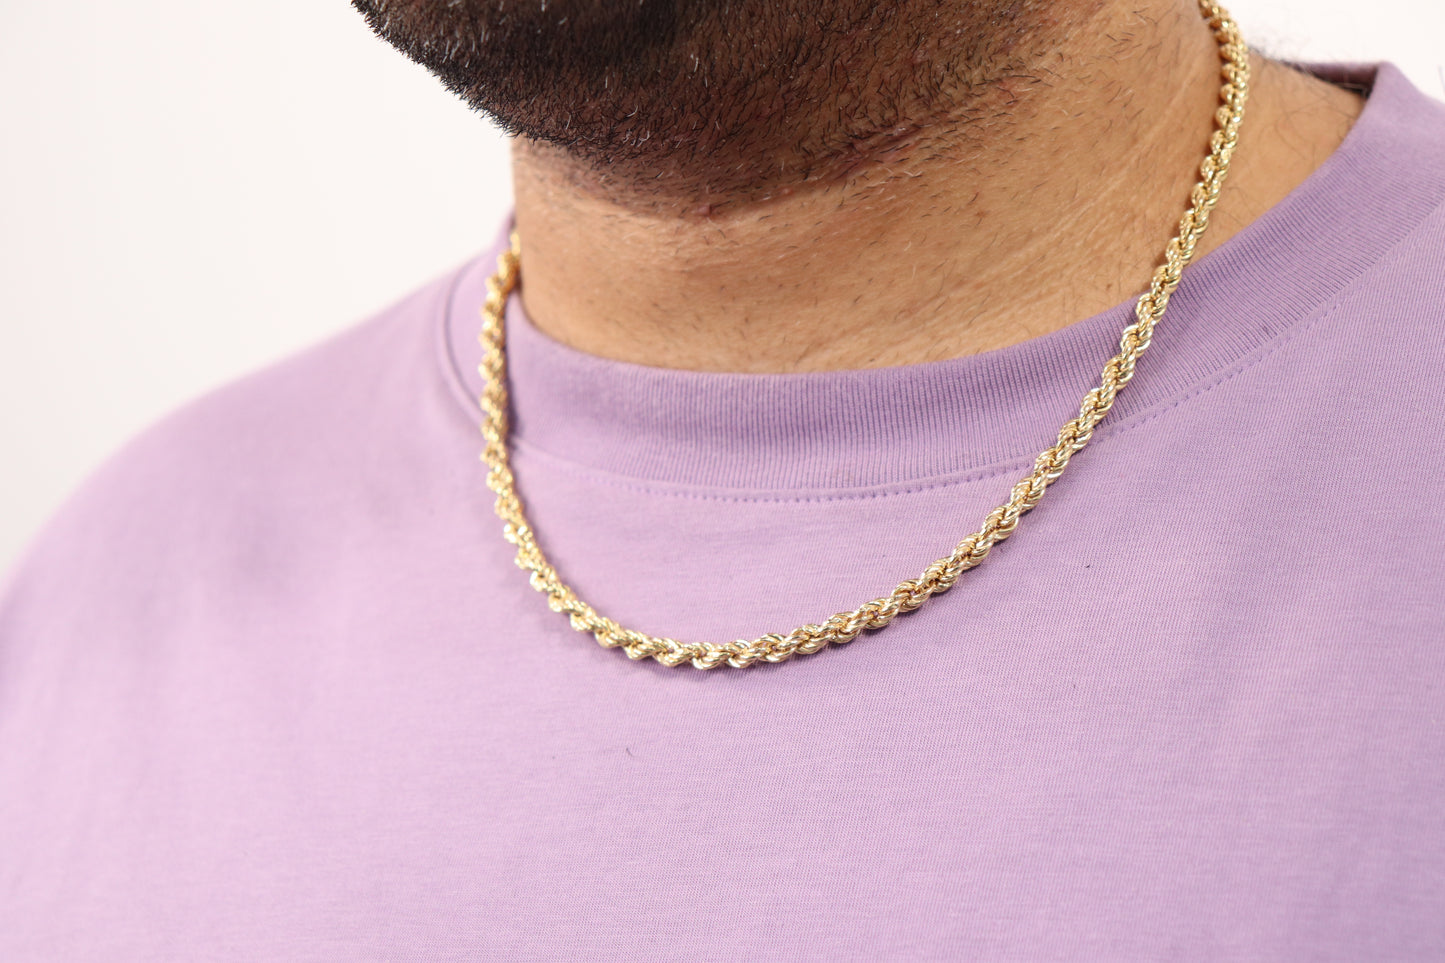 Gold Power Rope Chain